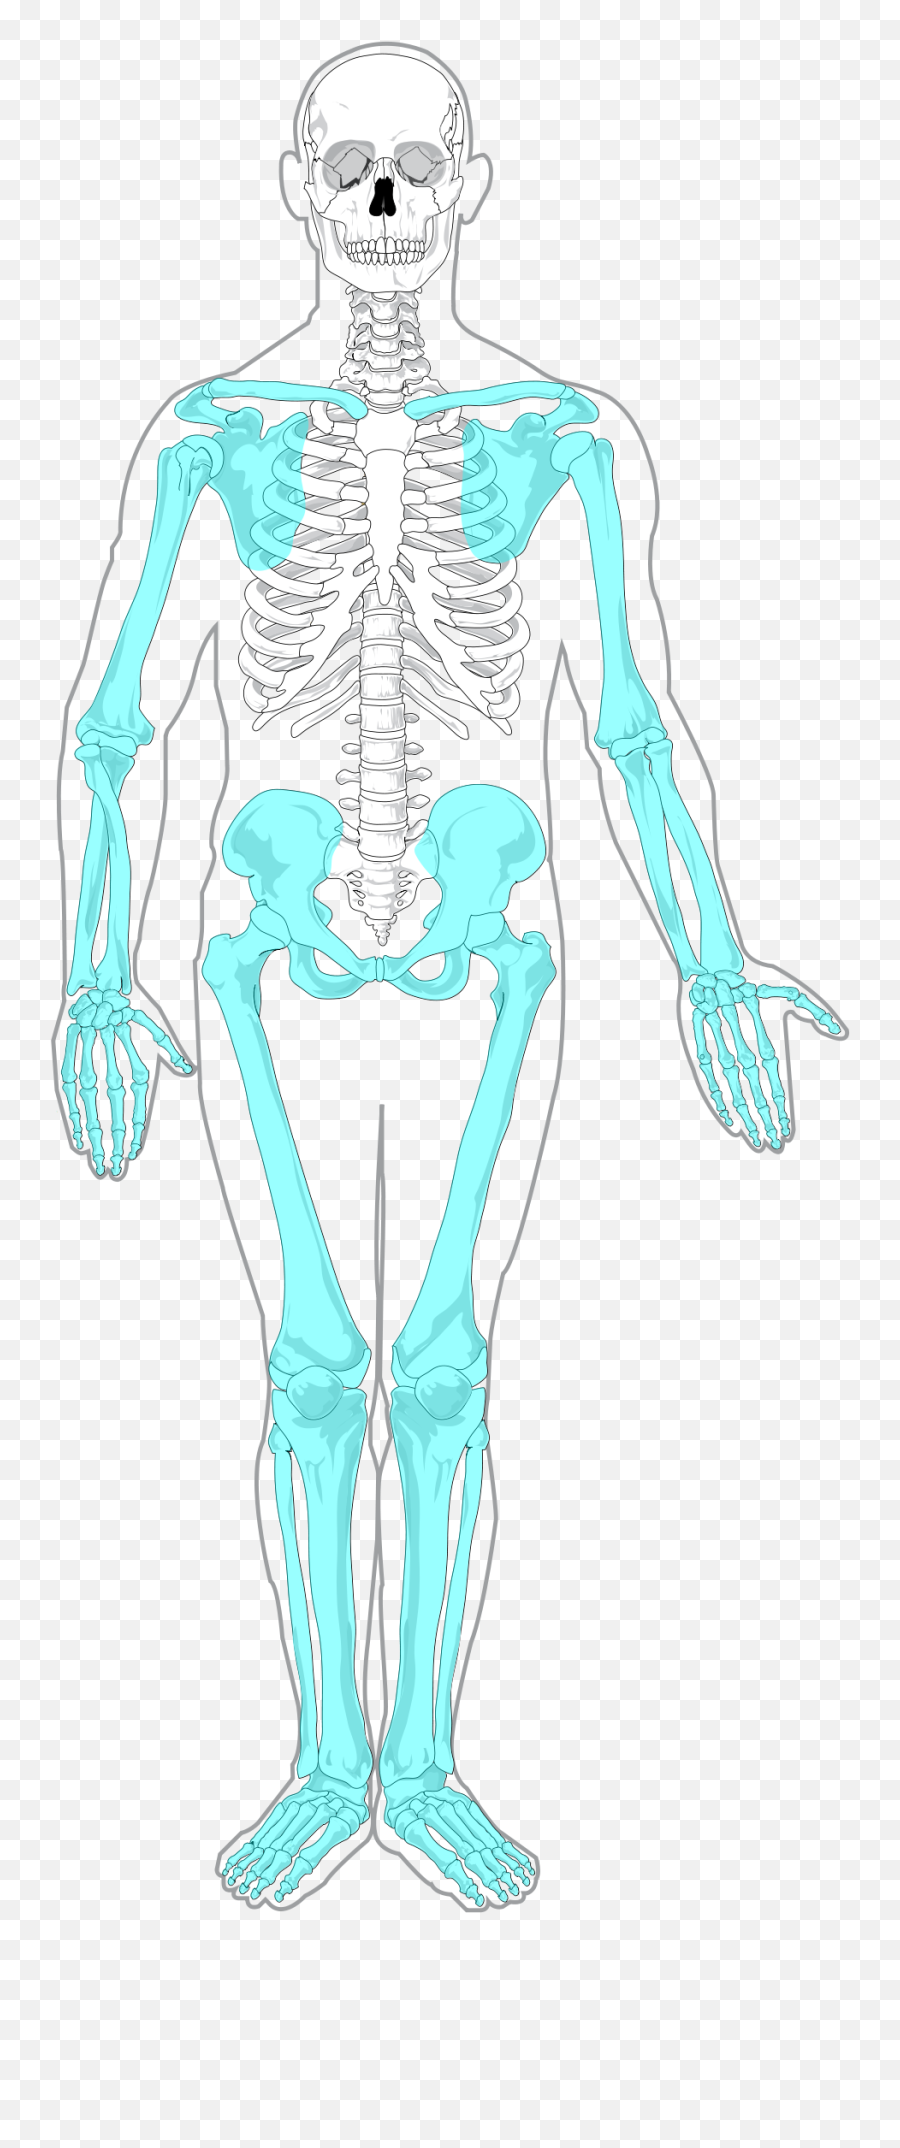 Fileappendicular Skeleton Diagram Blanksvg Wikimedia Commons Unlabeled Axial And Appendicular 